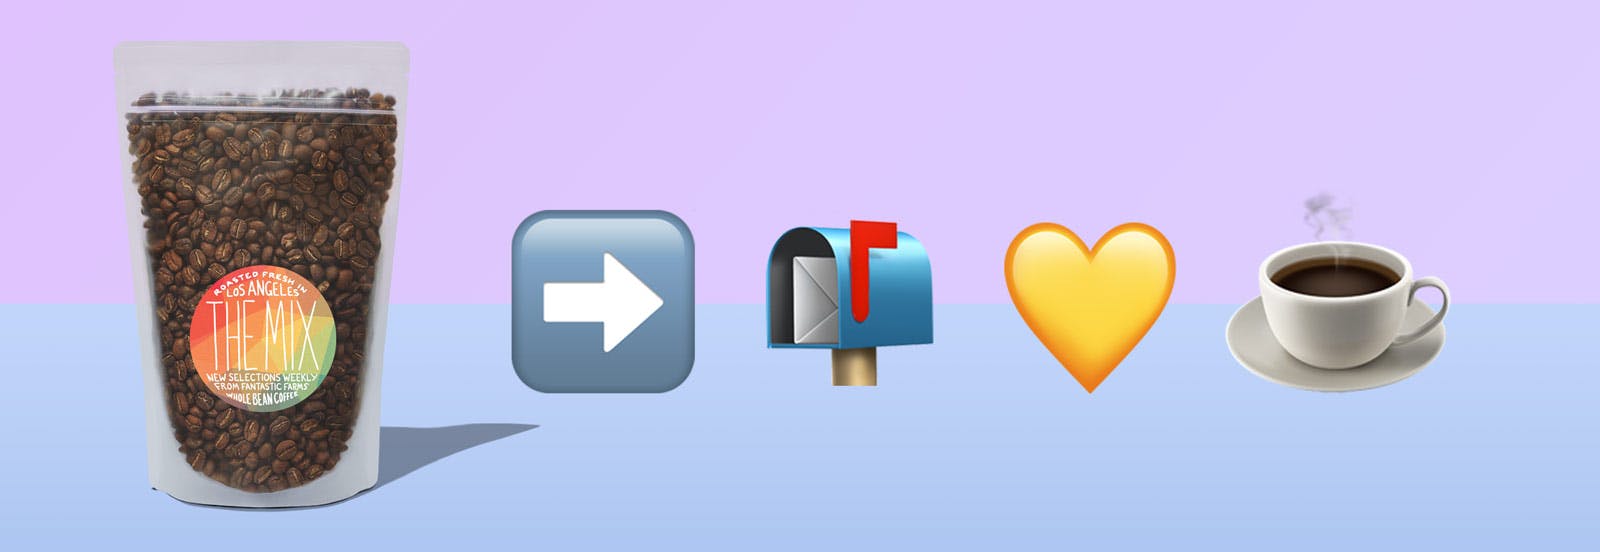 a bag of Yes Plz coffee with a right arrow emoji pointing at a mailbox emoji and a yellow heart emoji